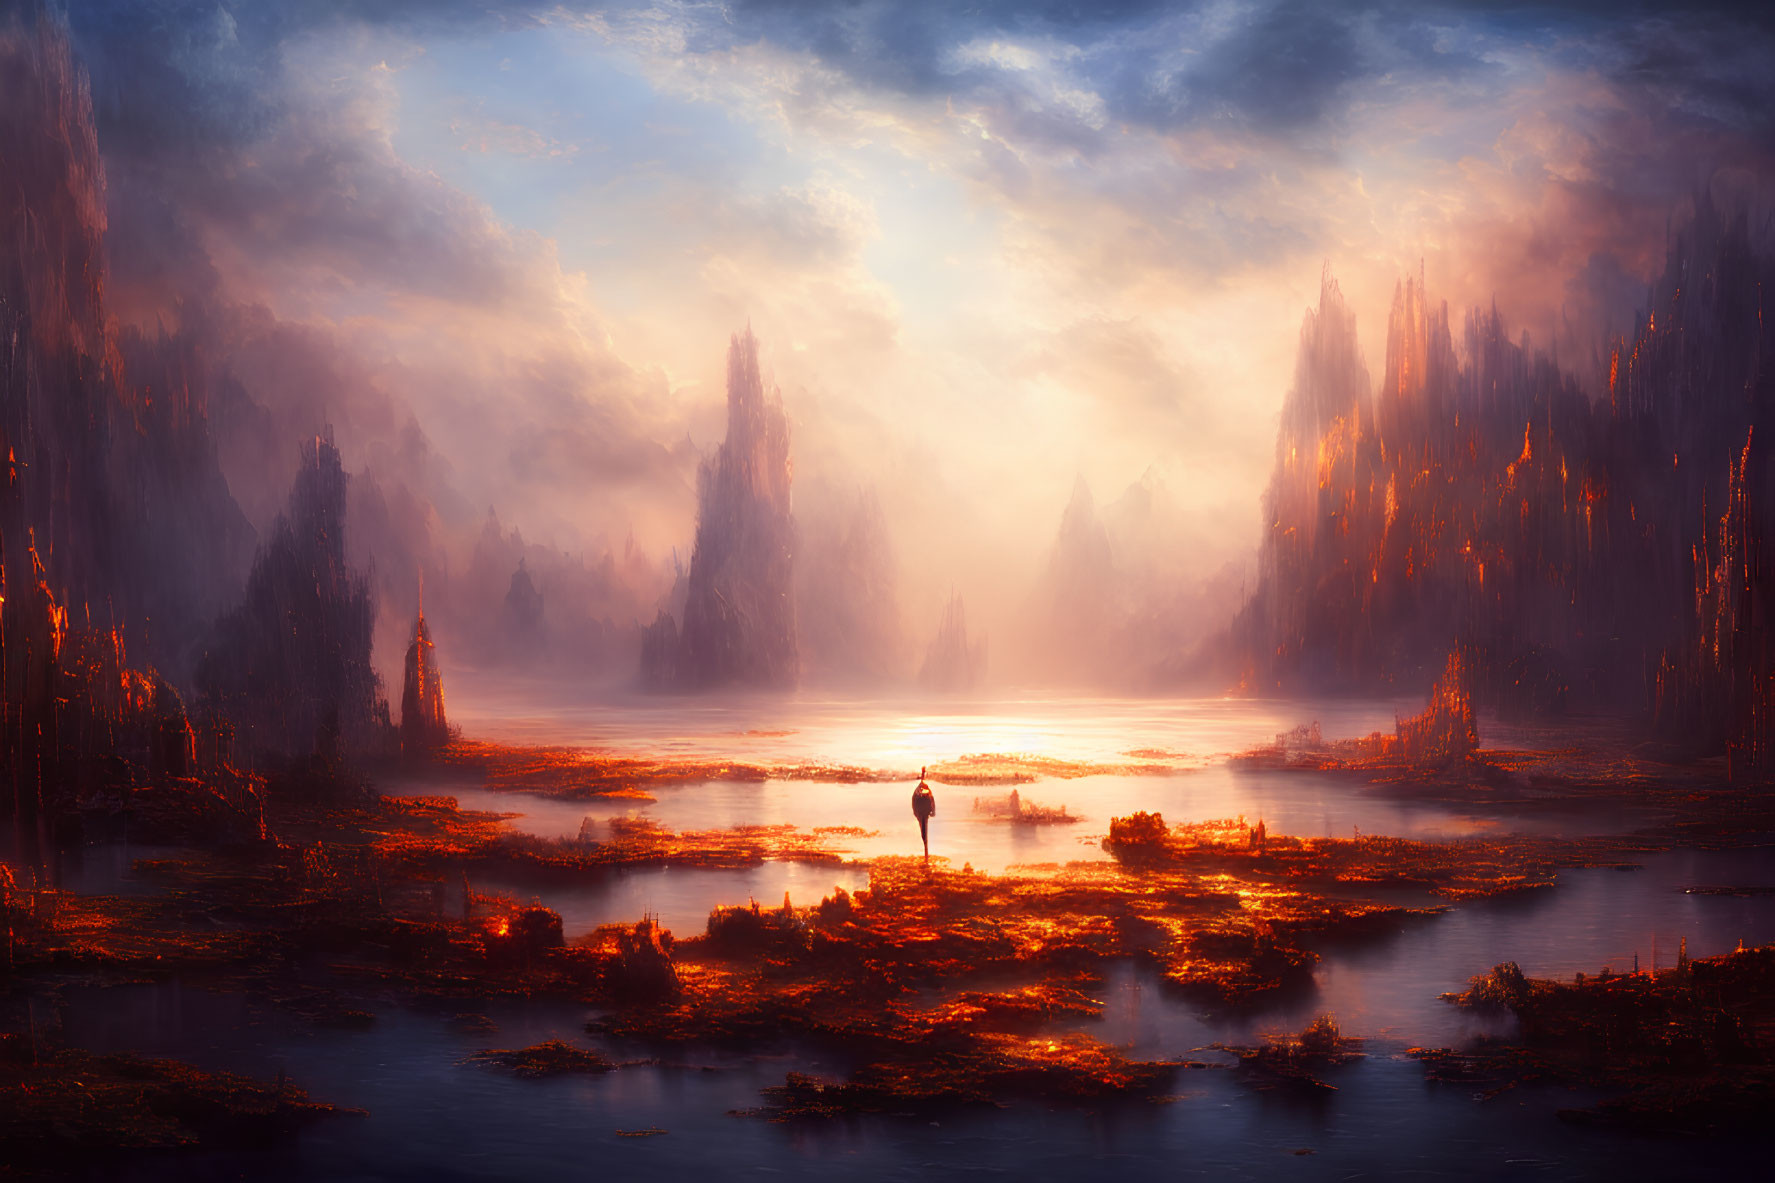 Solitary figure by tranquil lake with ethereal spires at sunset